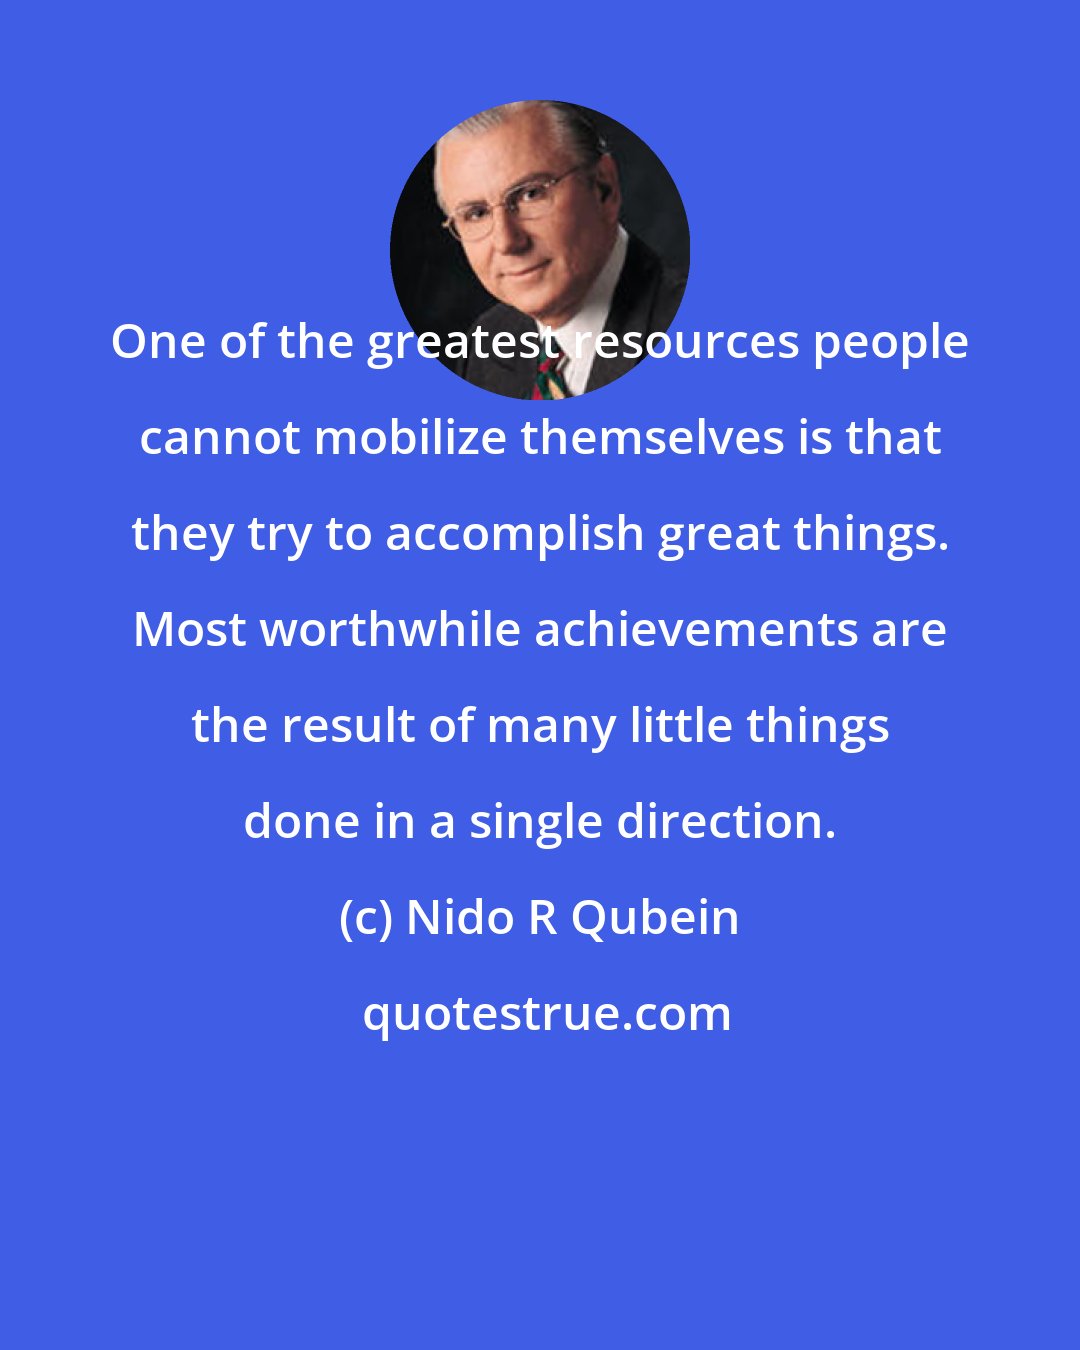 Nido R Qubein: One of the greatest resources people cannot mobilize themselves is that they try to accomplish great things. Most worthwhile achievements are the result of many little things done in a single direction.